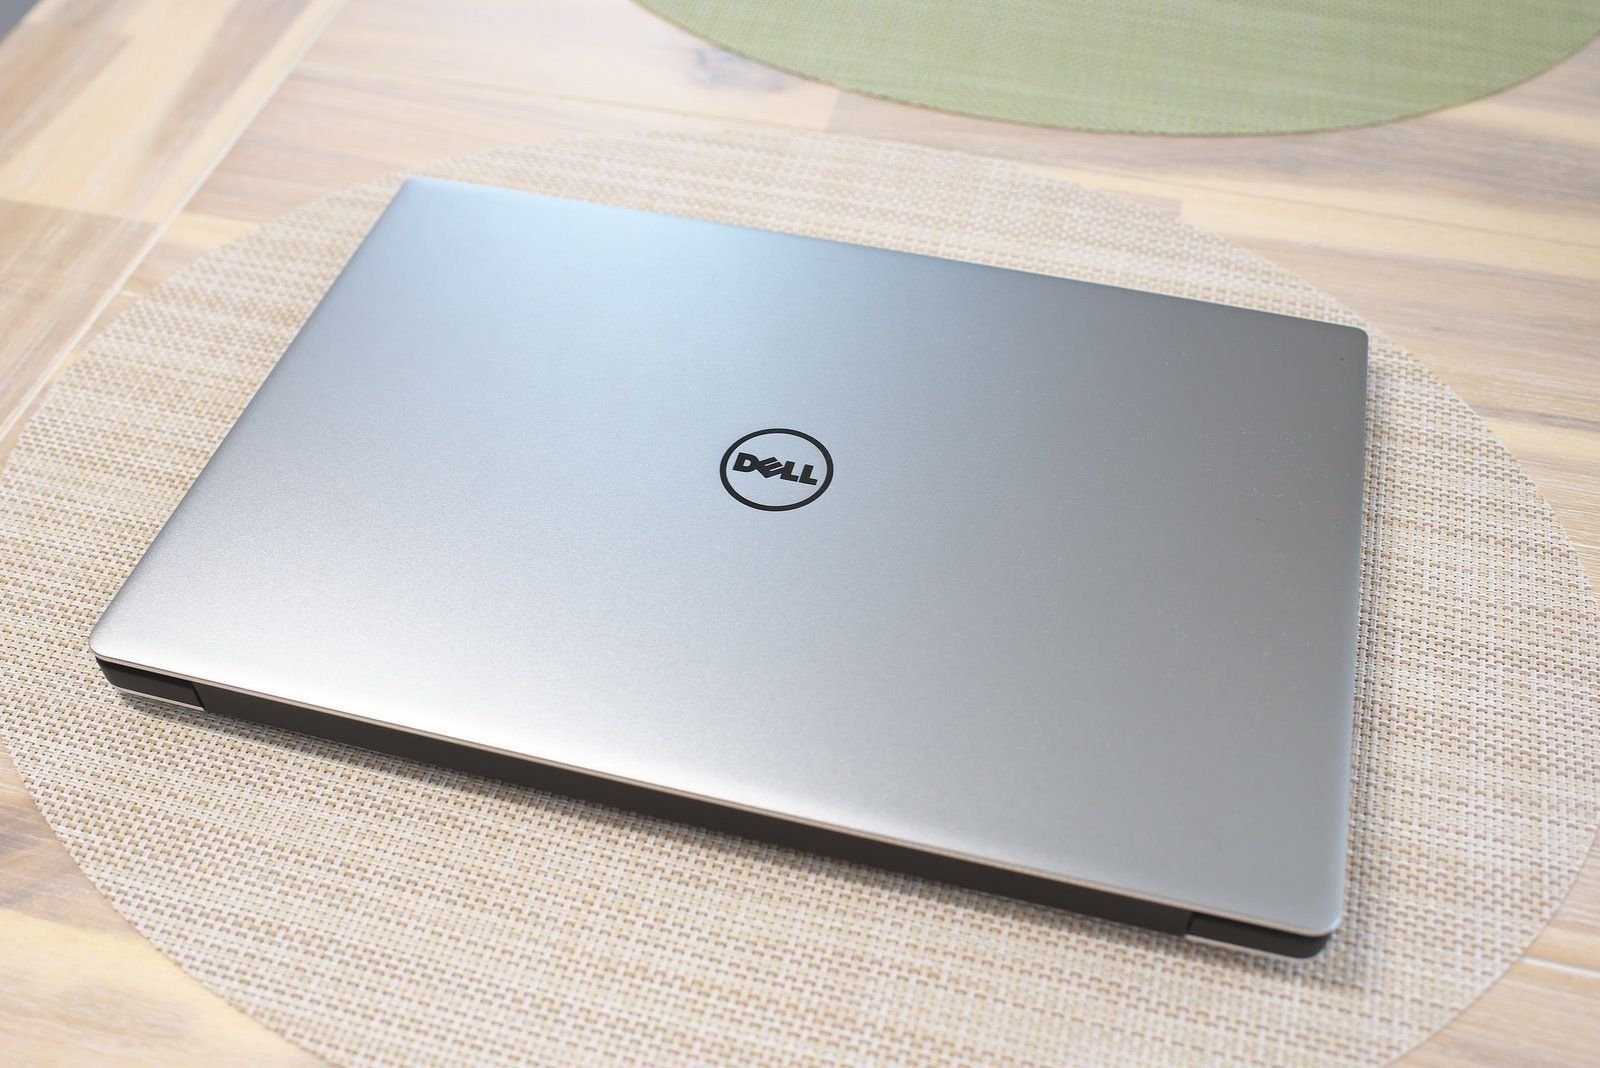 The best convertible laptops in 2019